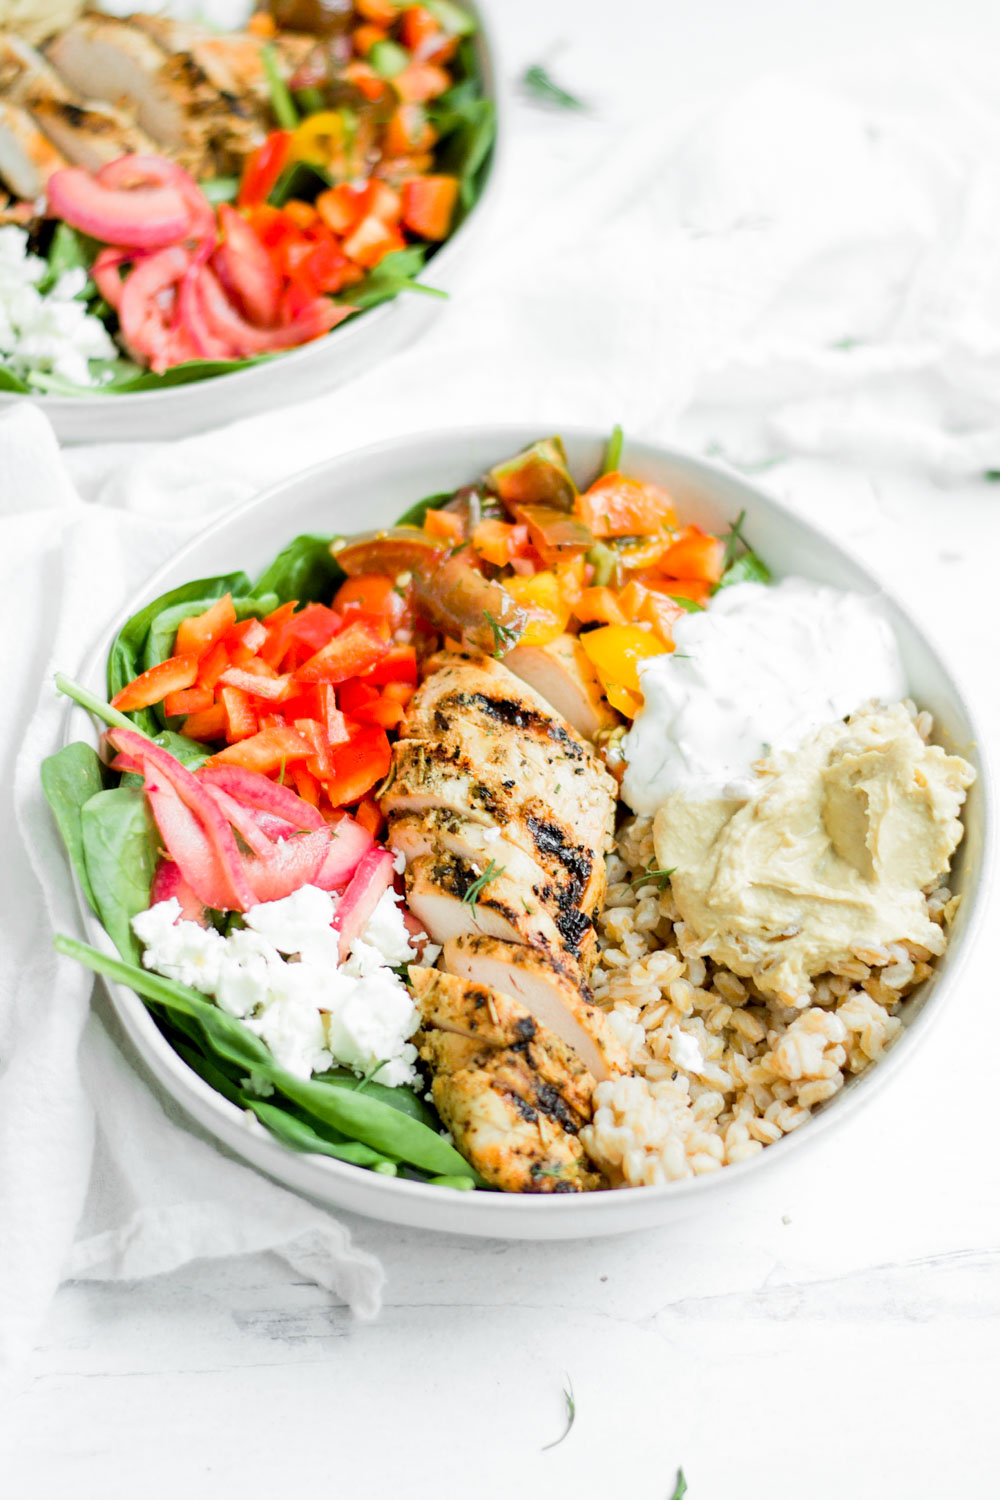 Creative DIY dinner ideas: Make your own Mediterranean bowls, like these at Sarah Gold Nutrition